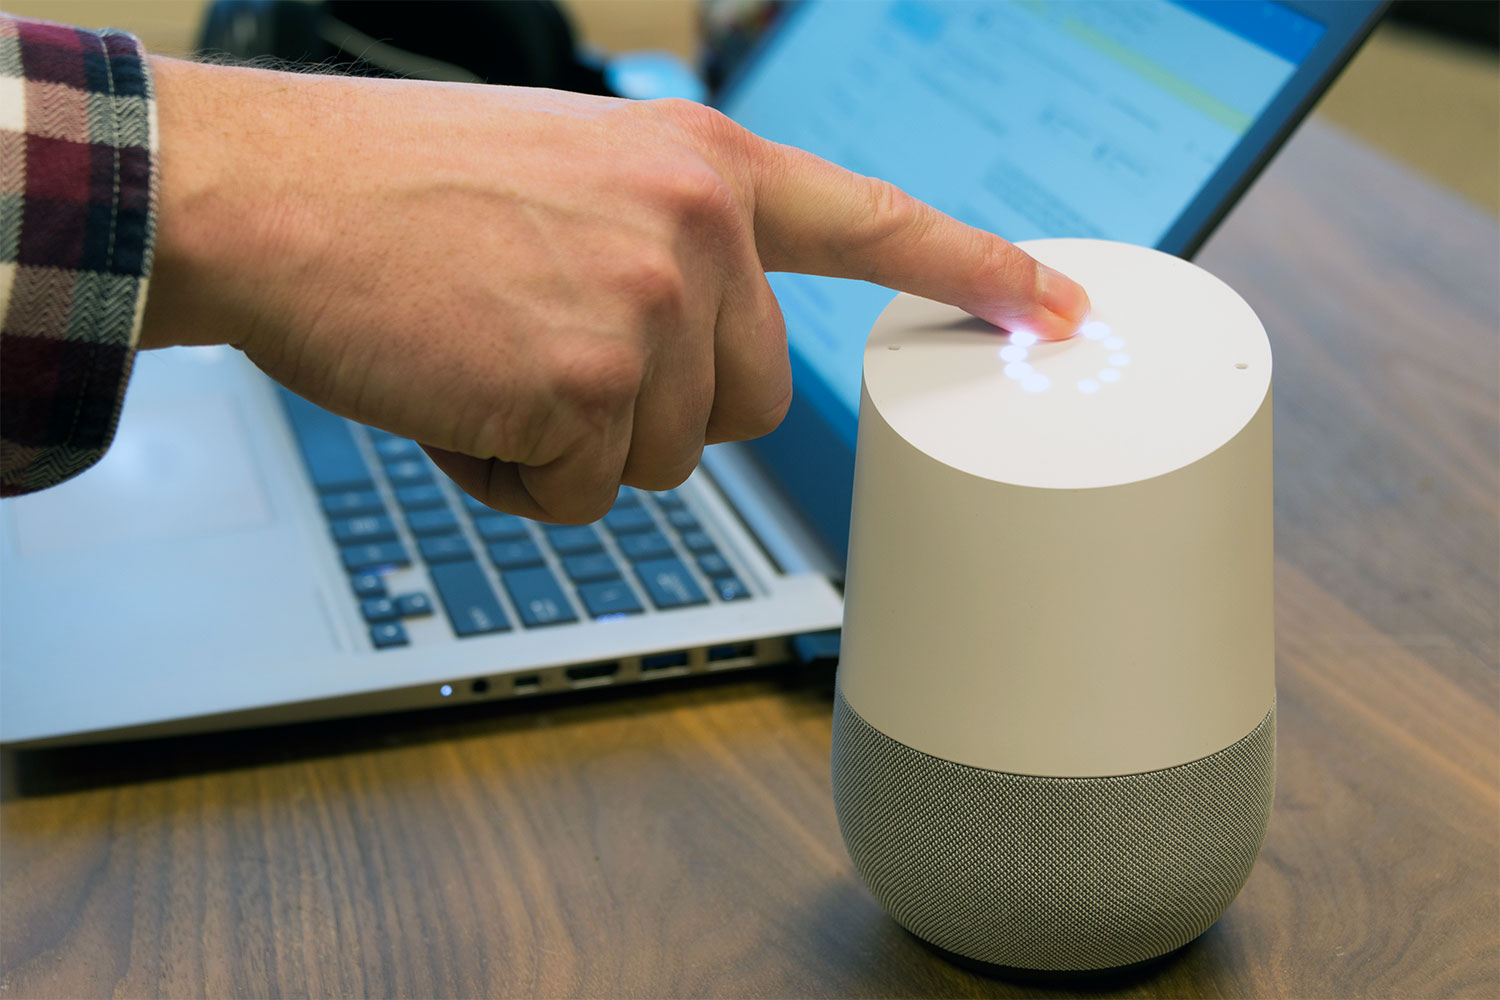 Third-party Google Assistant speakers put “OK Google” in tons of form  factors